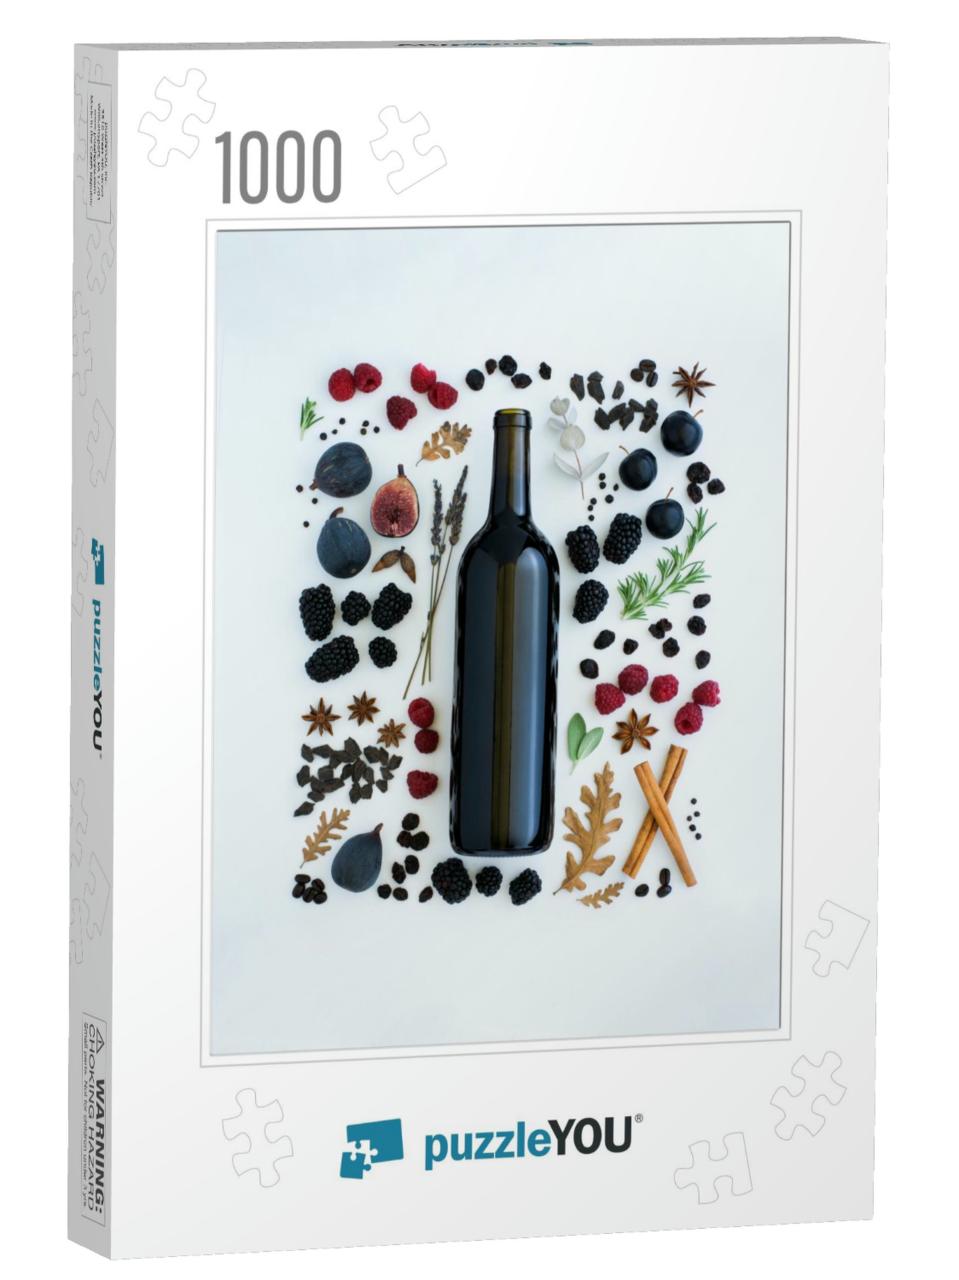 Flavors of Red Wine Flat Lay, Jammy Red Wine Tasting Note... Jigsaw Puzzle with 1000 pieces